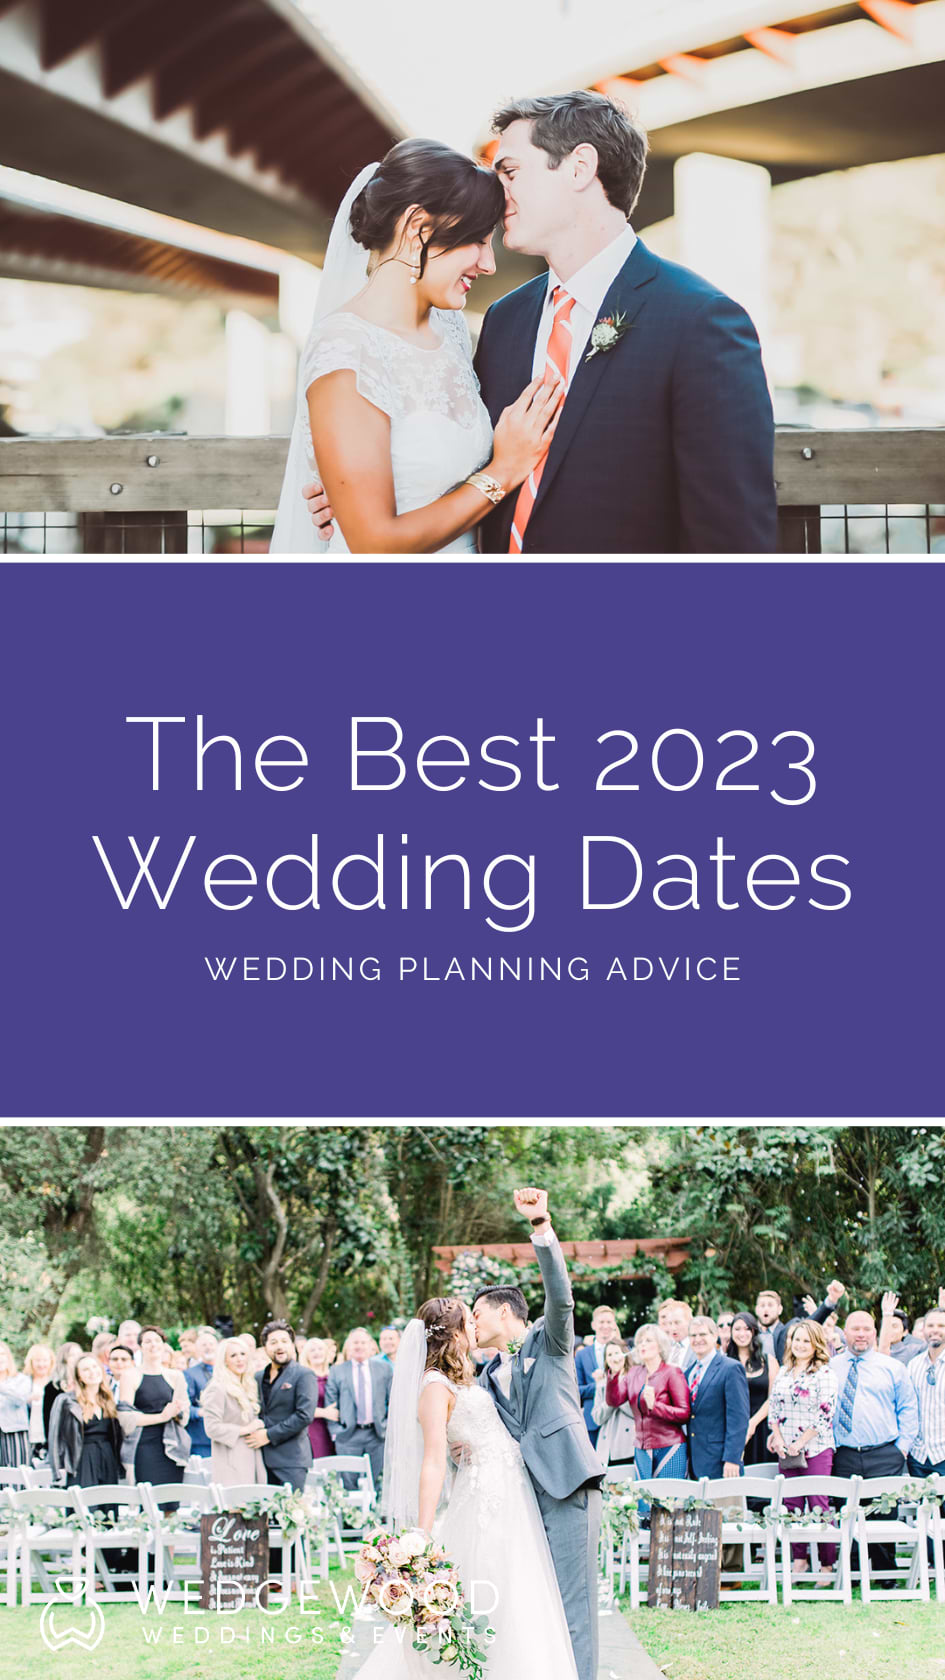 Your wedding is more important than the date. In fact, we are firm believers that there are no “bad days” to get married! Your guests are much more likely to remember the gorgeous venue and fabulous ceremony than the date you choose. So have fun picking your wedding date! We’re here to help by showing you the very best wedding dates in 2023 so you and your fiancé are sure to find the ideal date to say, “I do.”